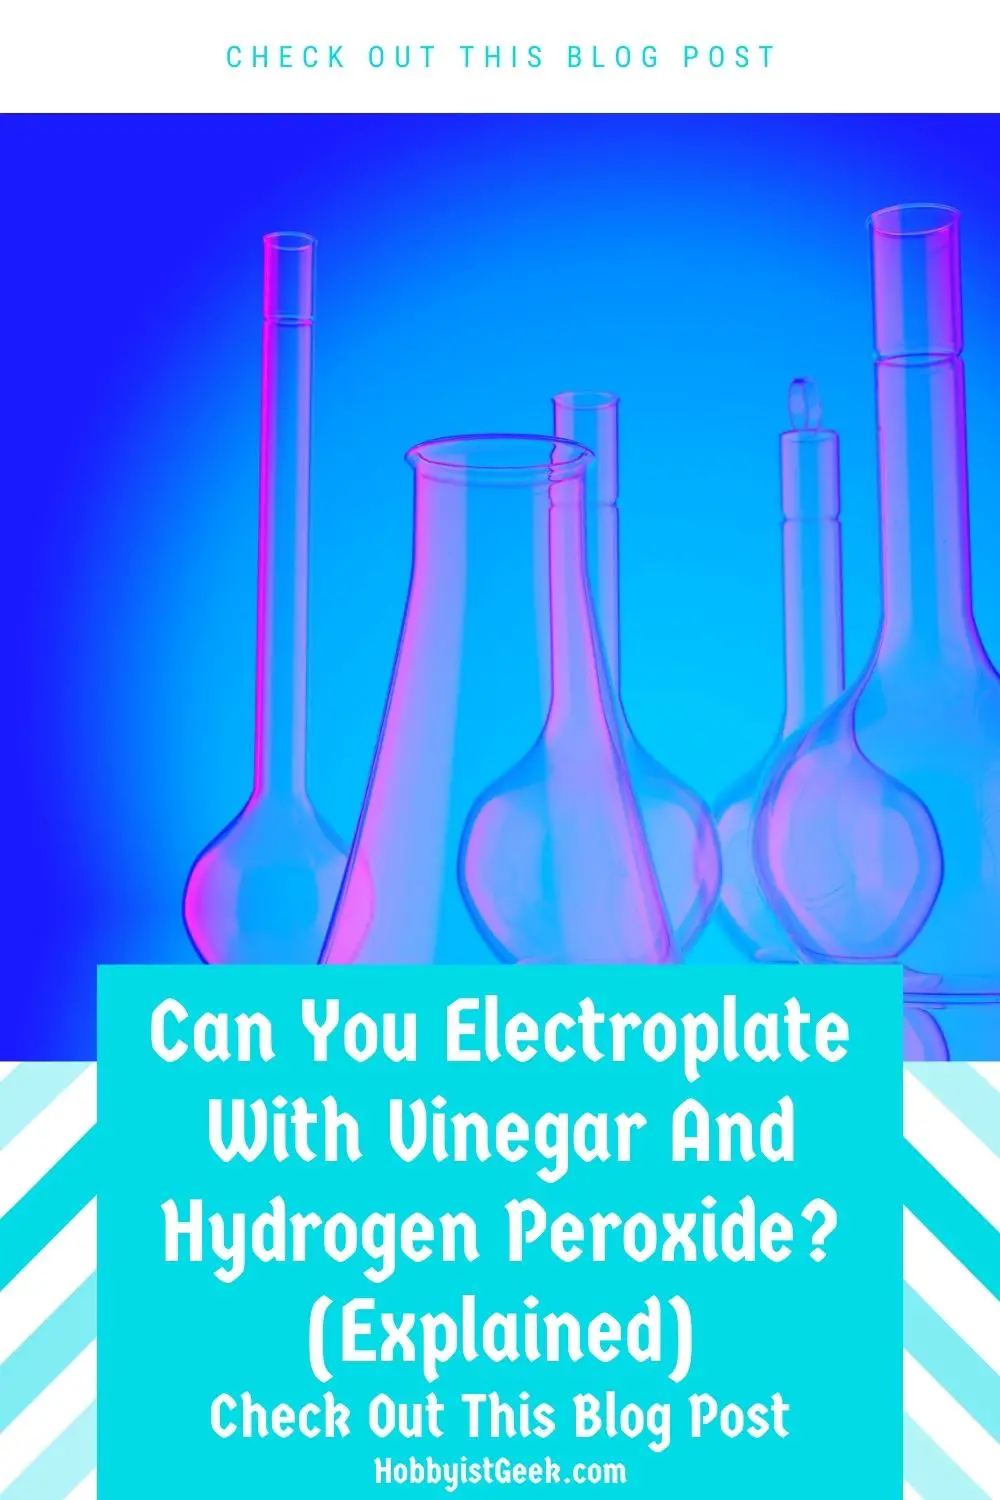 Can You Electroplate With Vinegar And Hydrogen Peroxide? (Best Way)